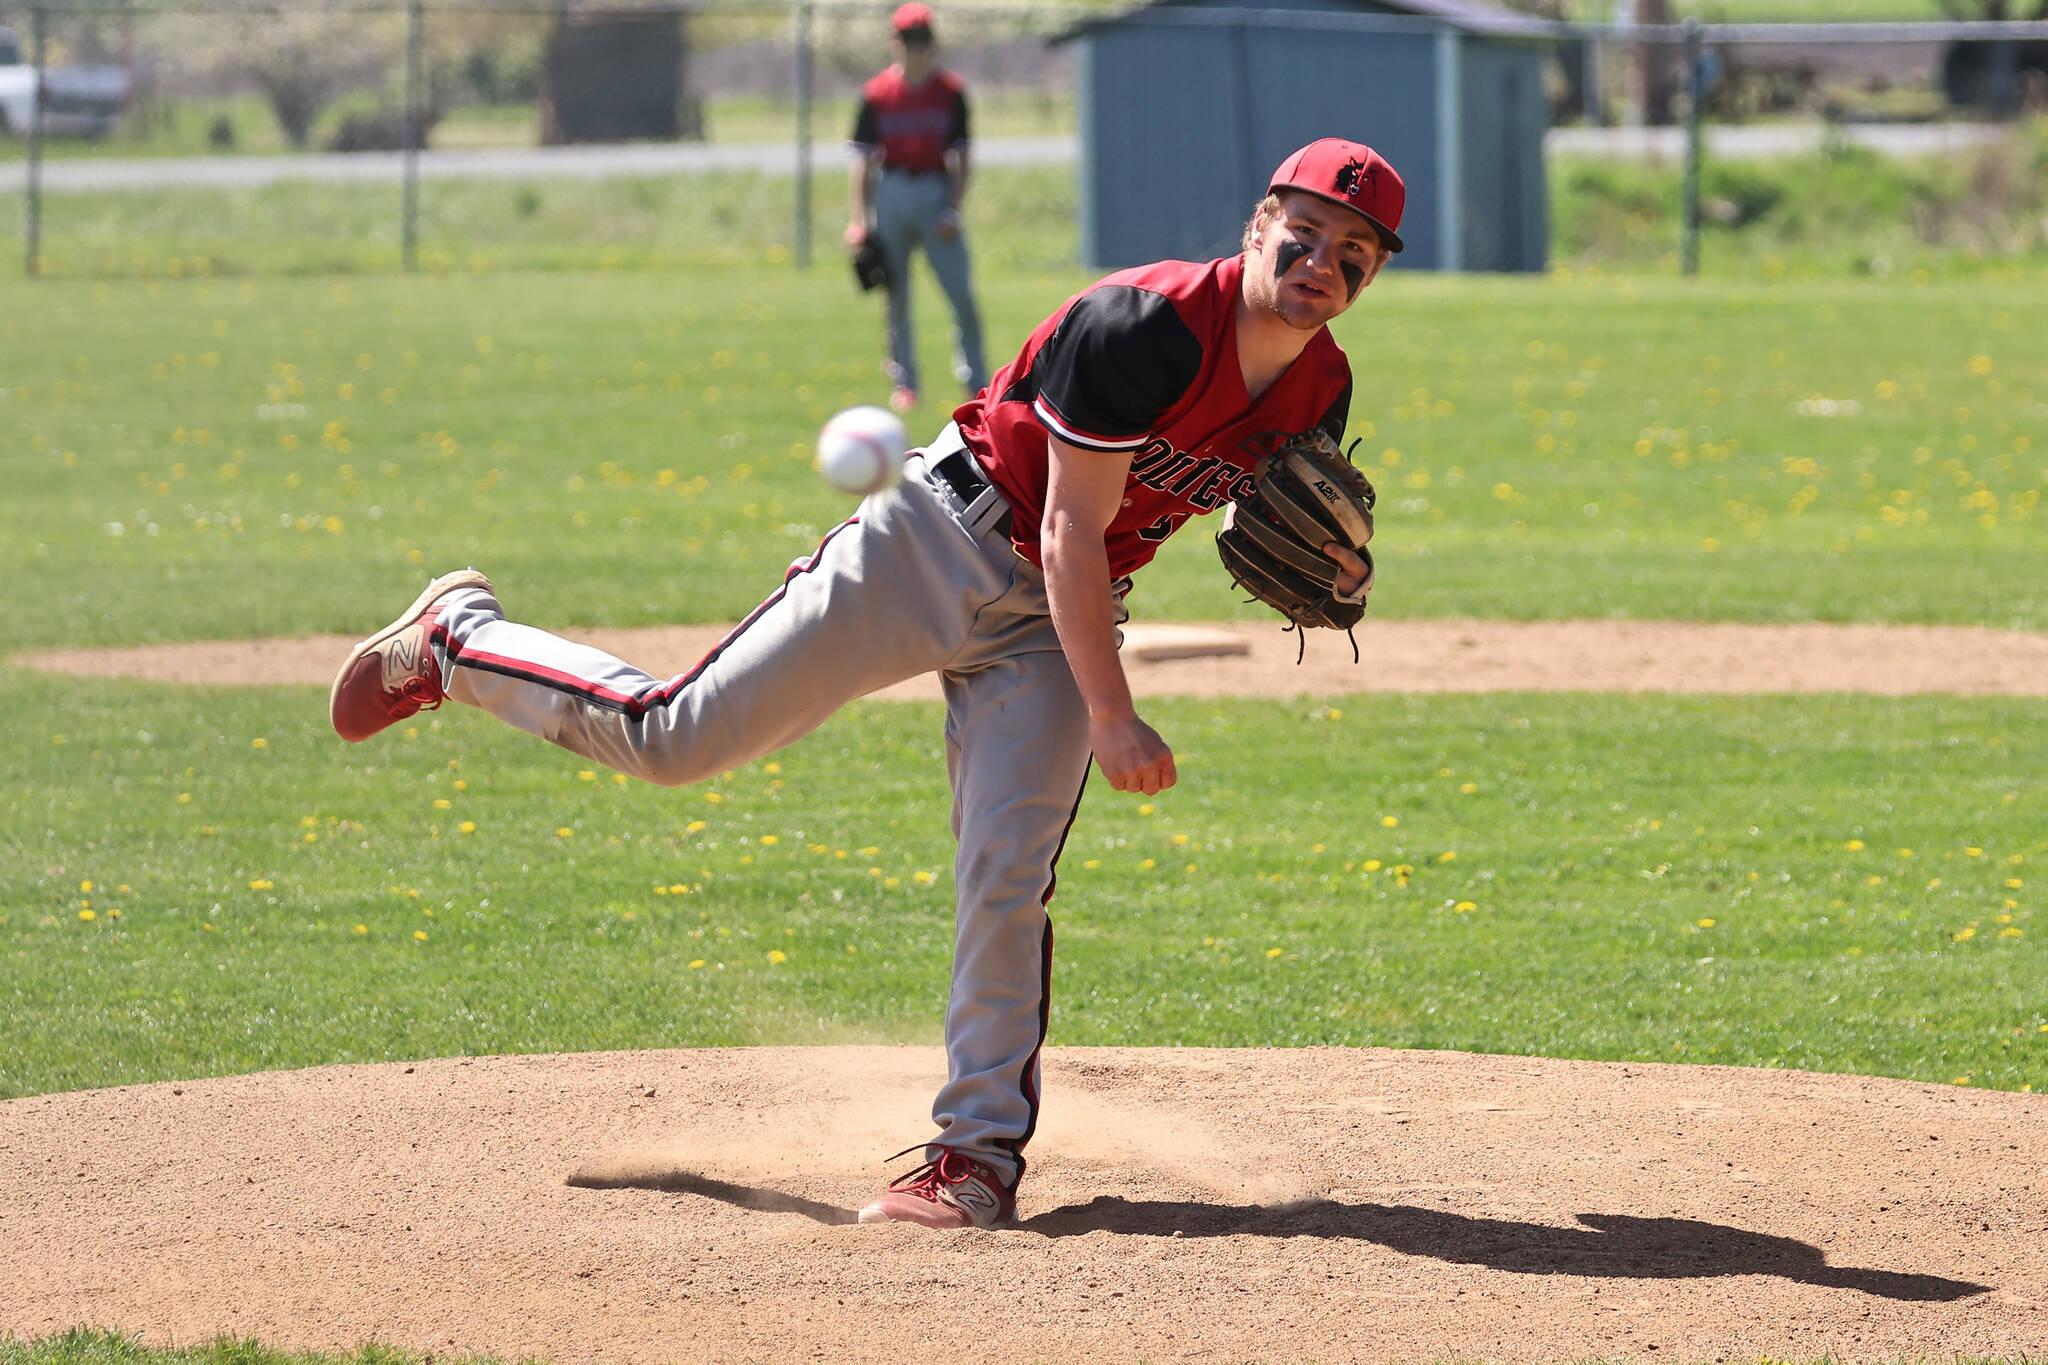 Photo by John Fisken
Coupeville High School senior Scott Hilborn pitches in a baseball game against La Conner Saturday afternoon. The Wolves won 14-1.